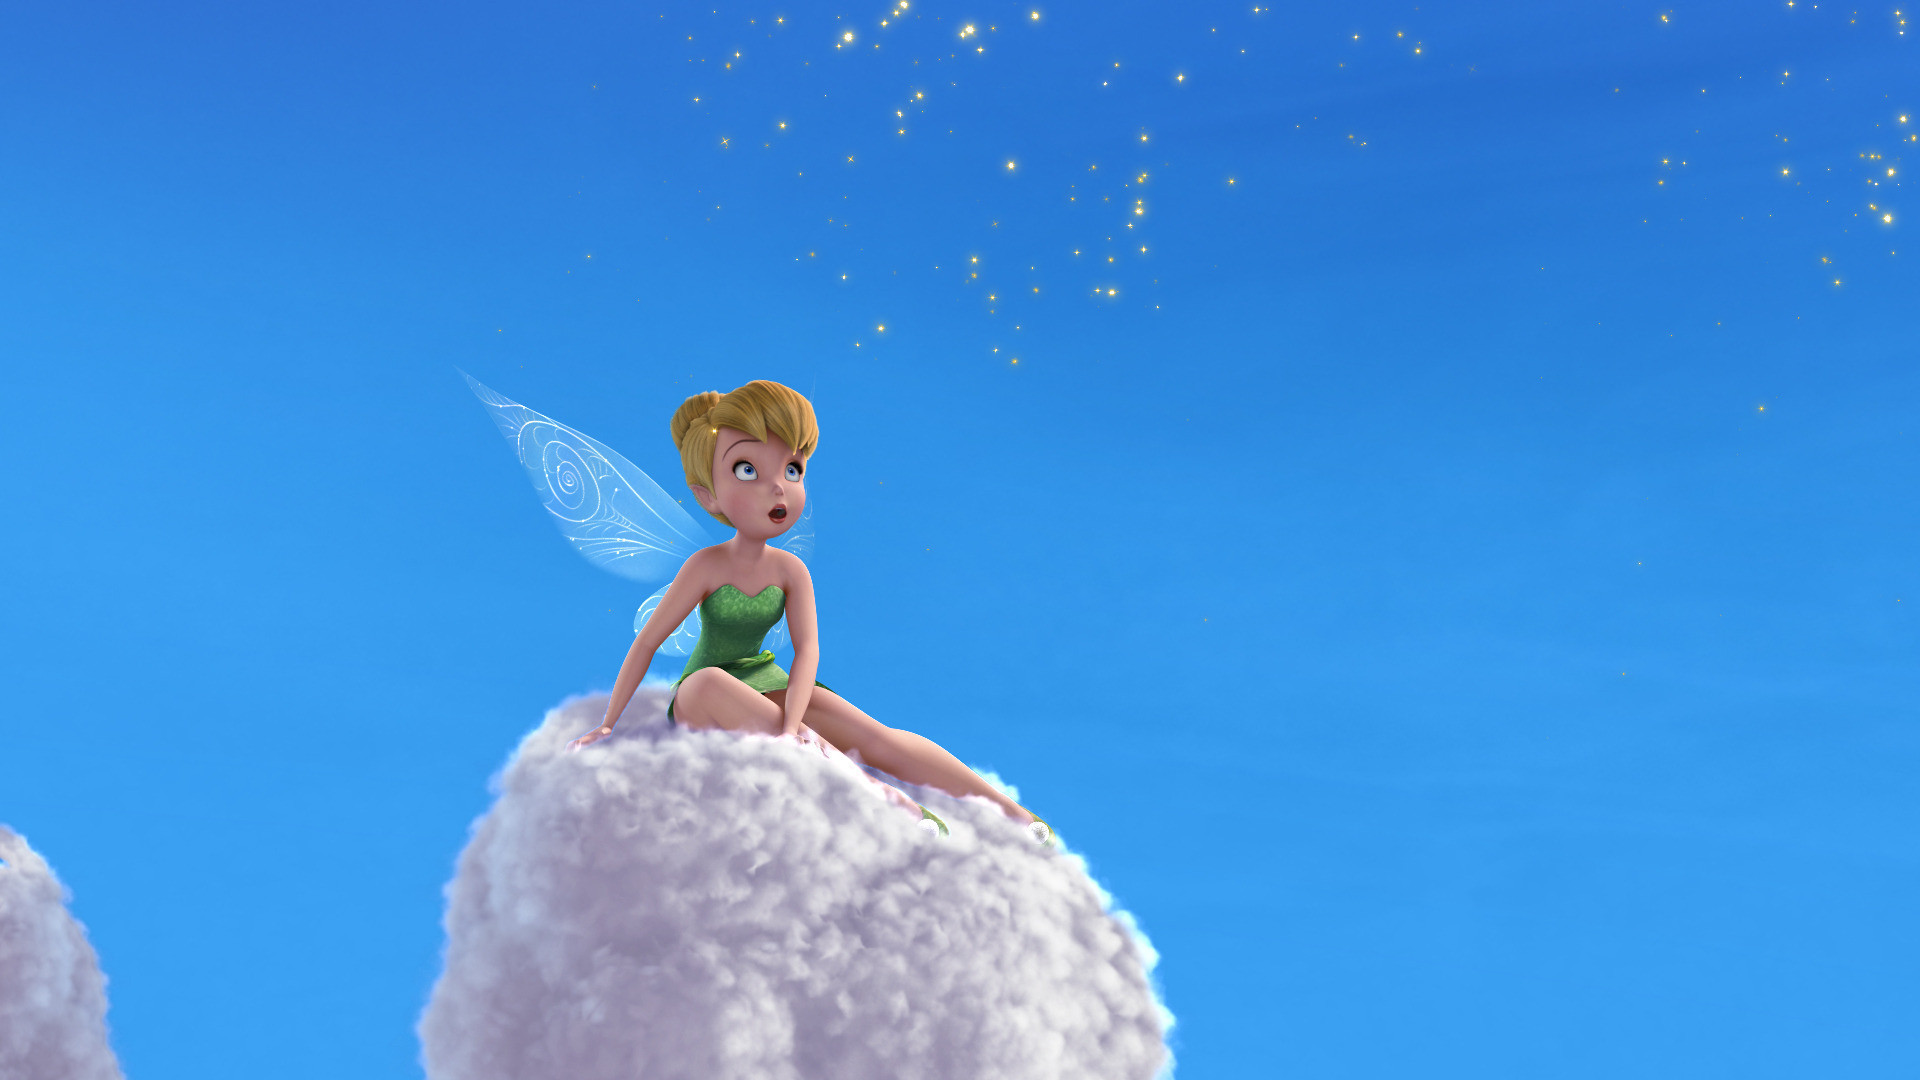 1920x1080 Tinkerbell hd pictures.